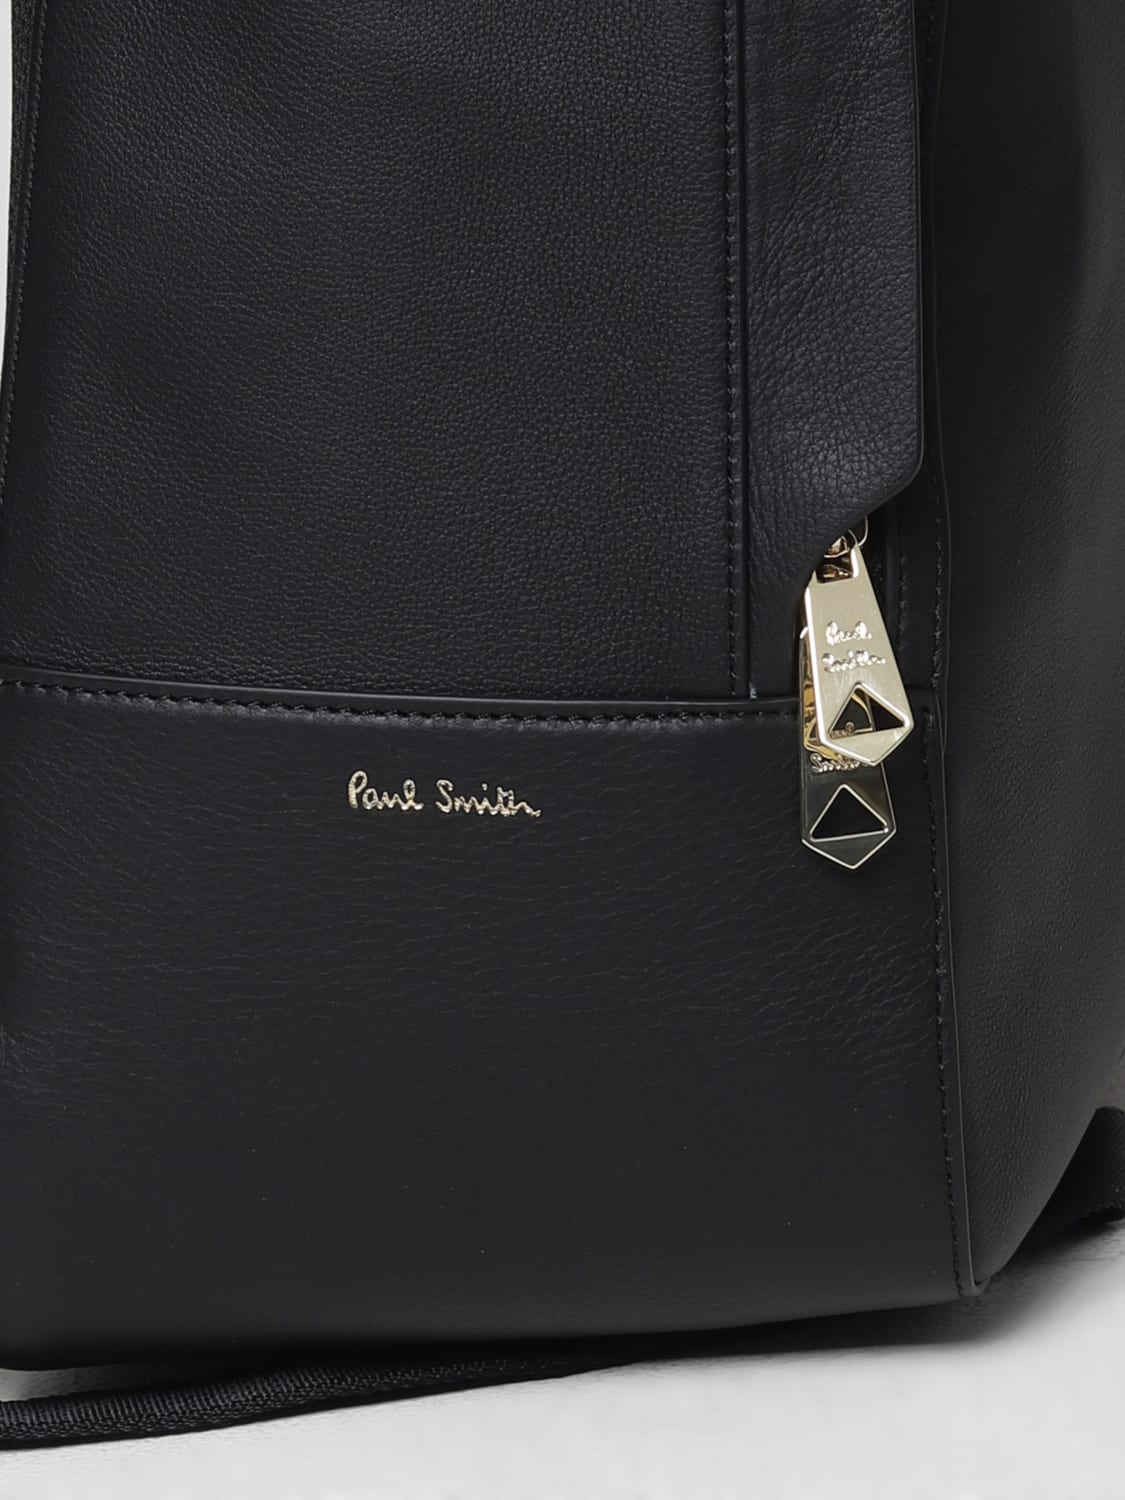 Paul Smith Bags for Men - Vestiaire Collective